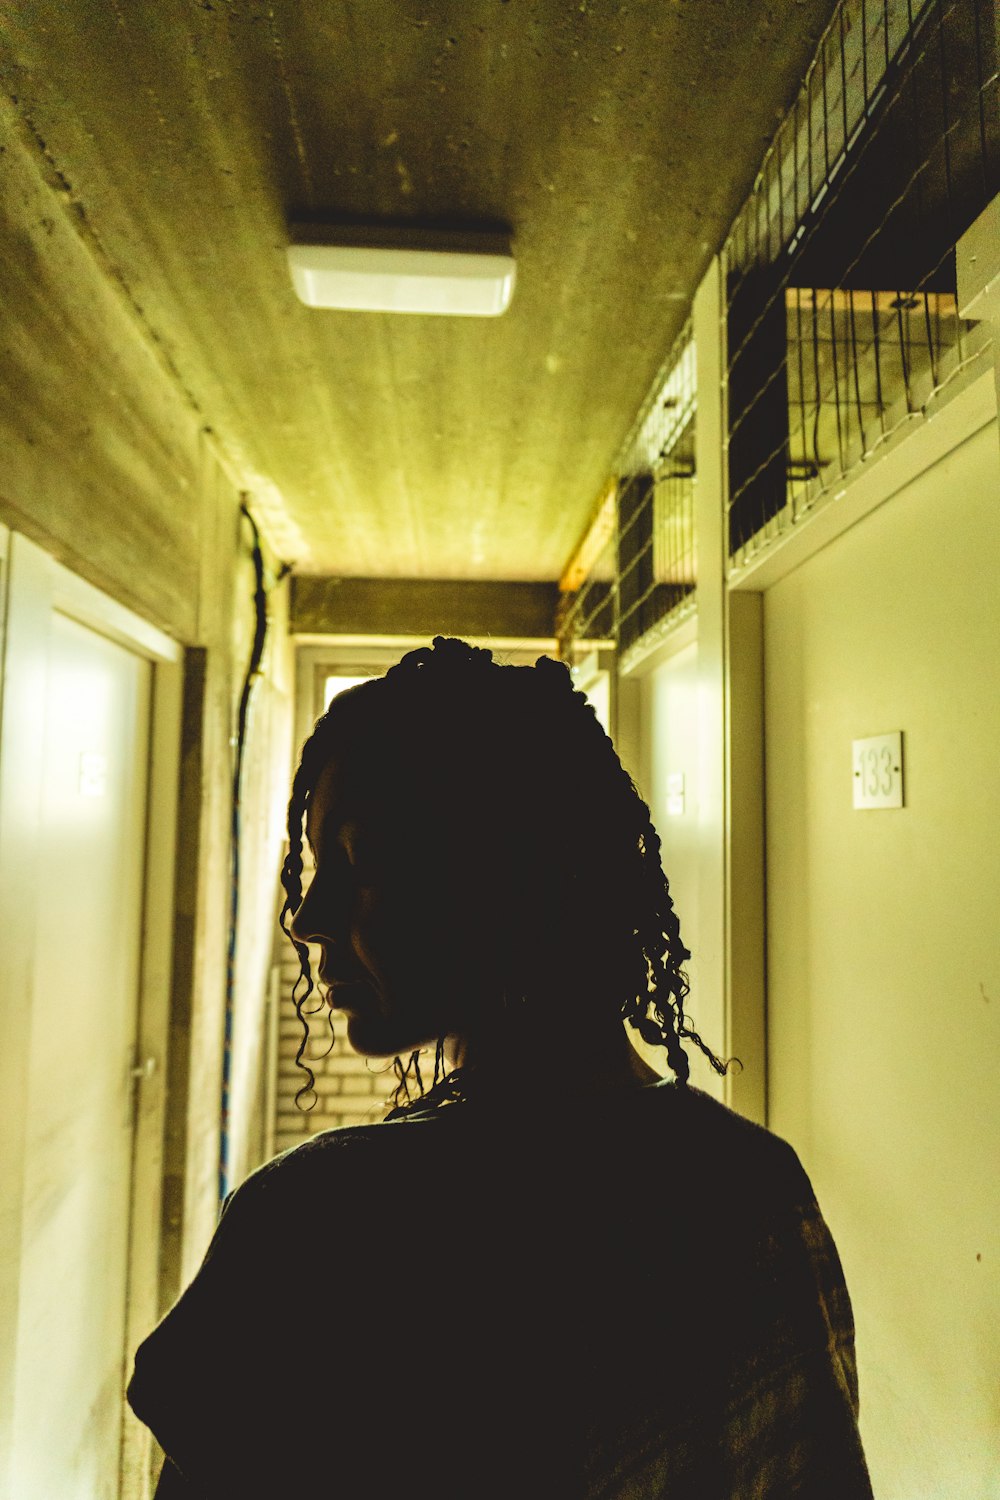 a person standing in a hallway with a light on